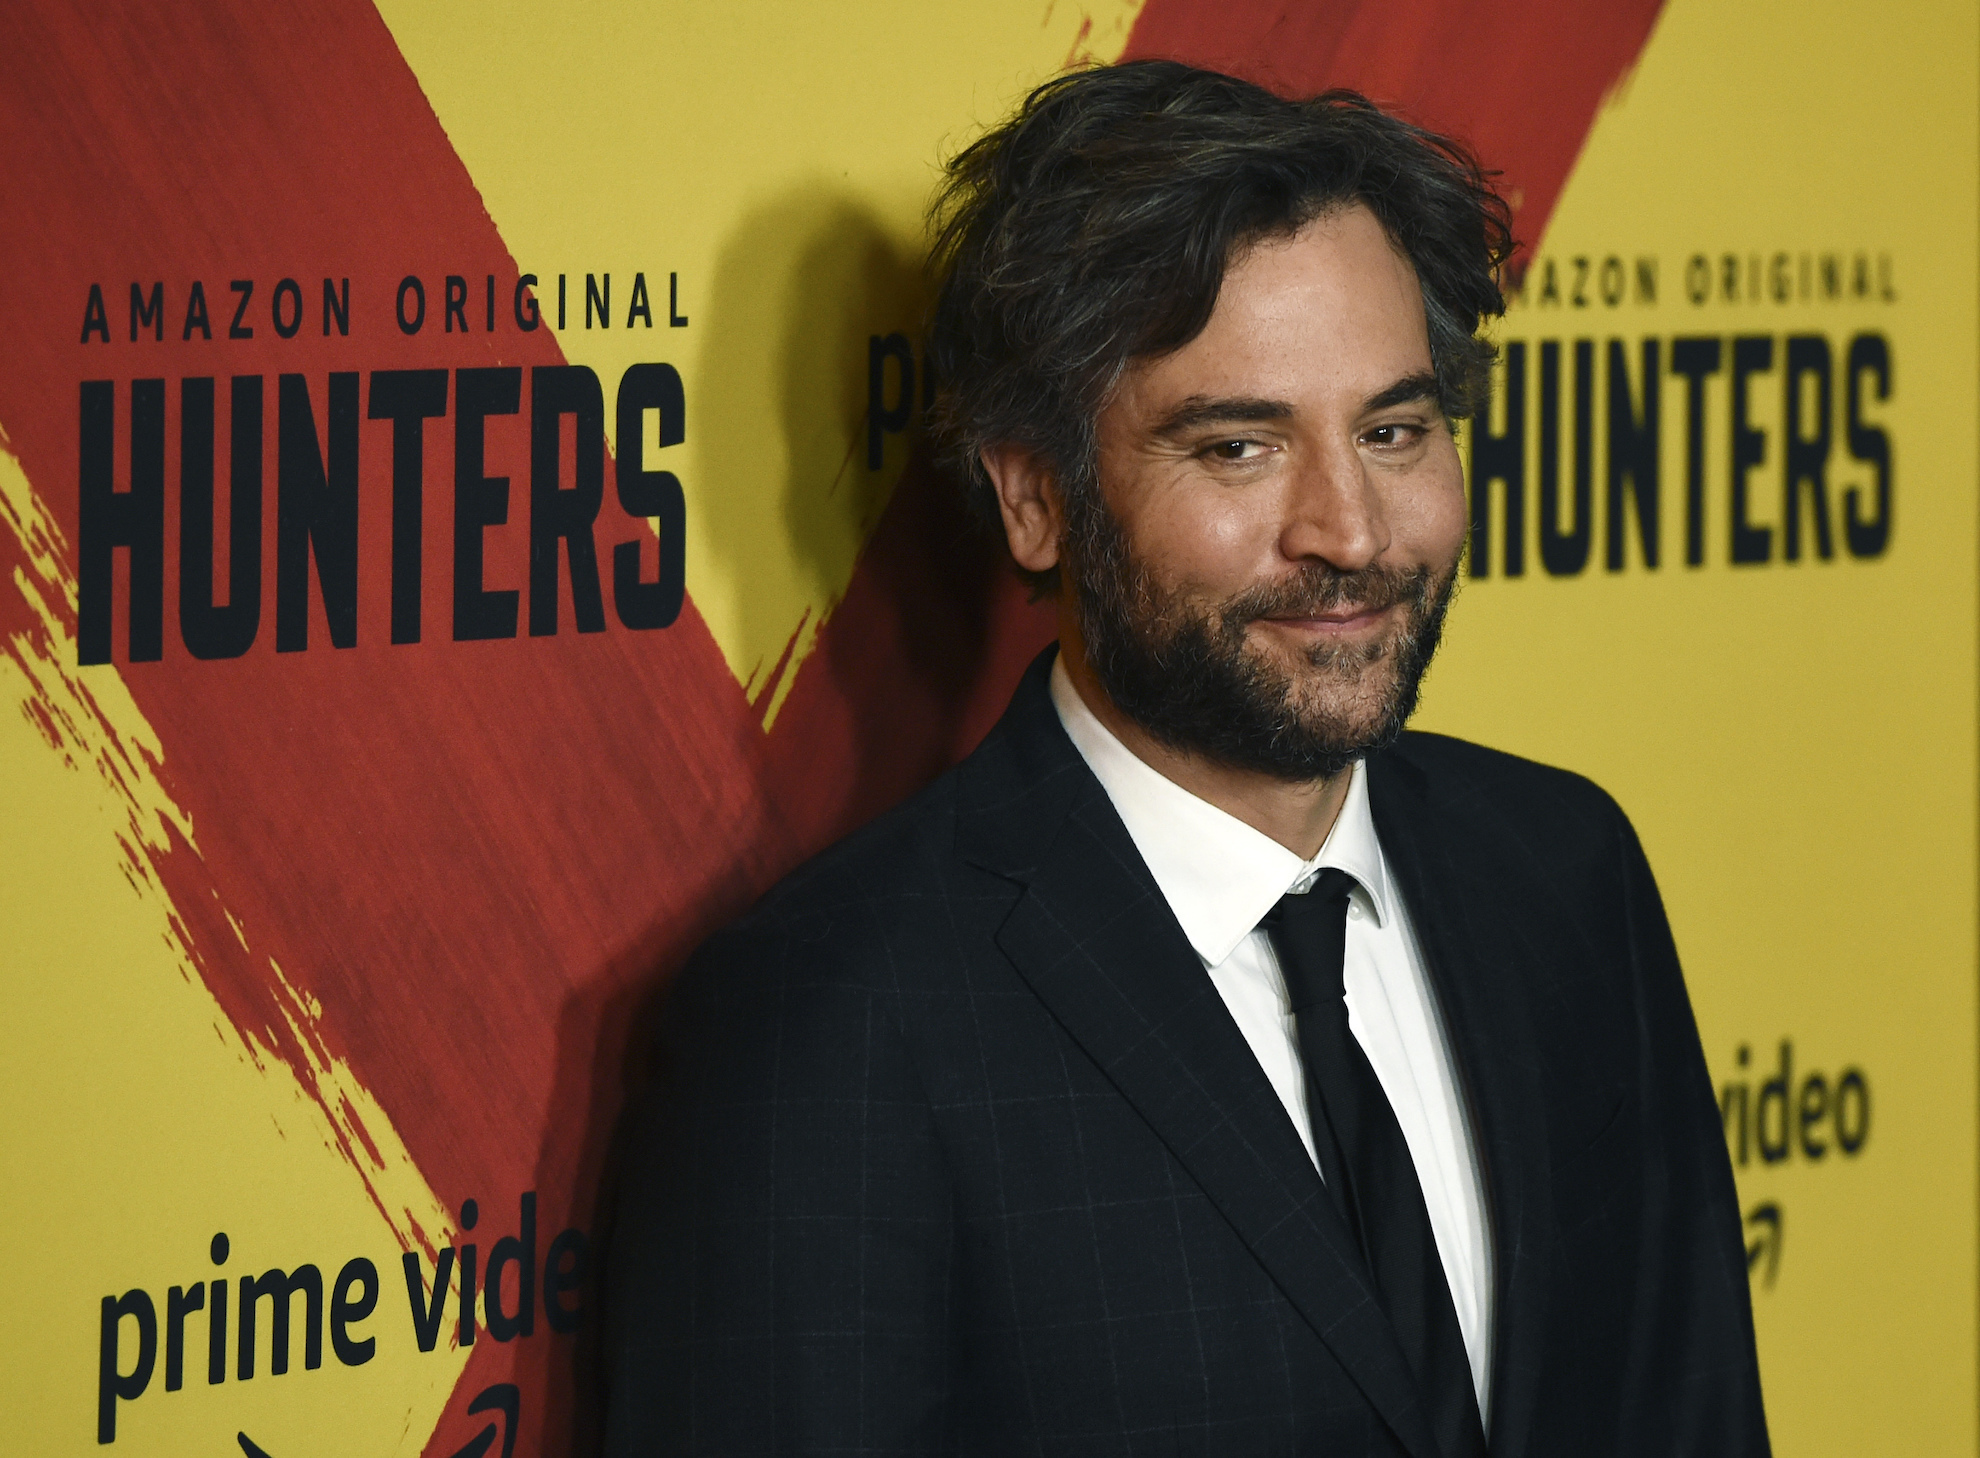 Josh Radnor, a cast member in the Amazon Prime Video series "Hunters," poses at the premiere of the show at the Directors Guild of America, Wednesday, Feb. 19, 2020, in Los Angeles. (AP Photo/Chris Pizzello)